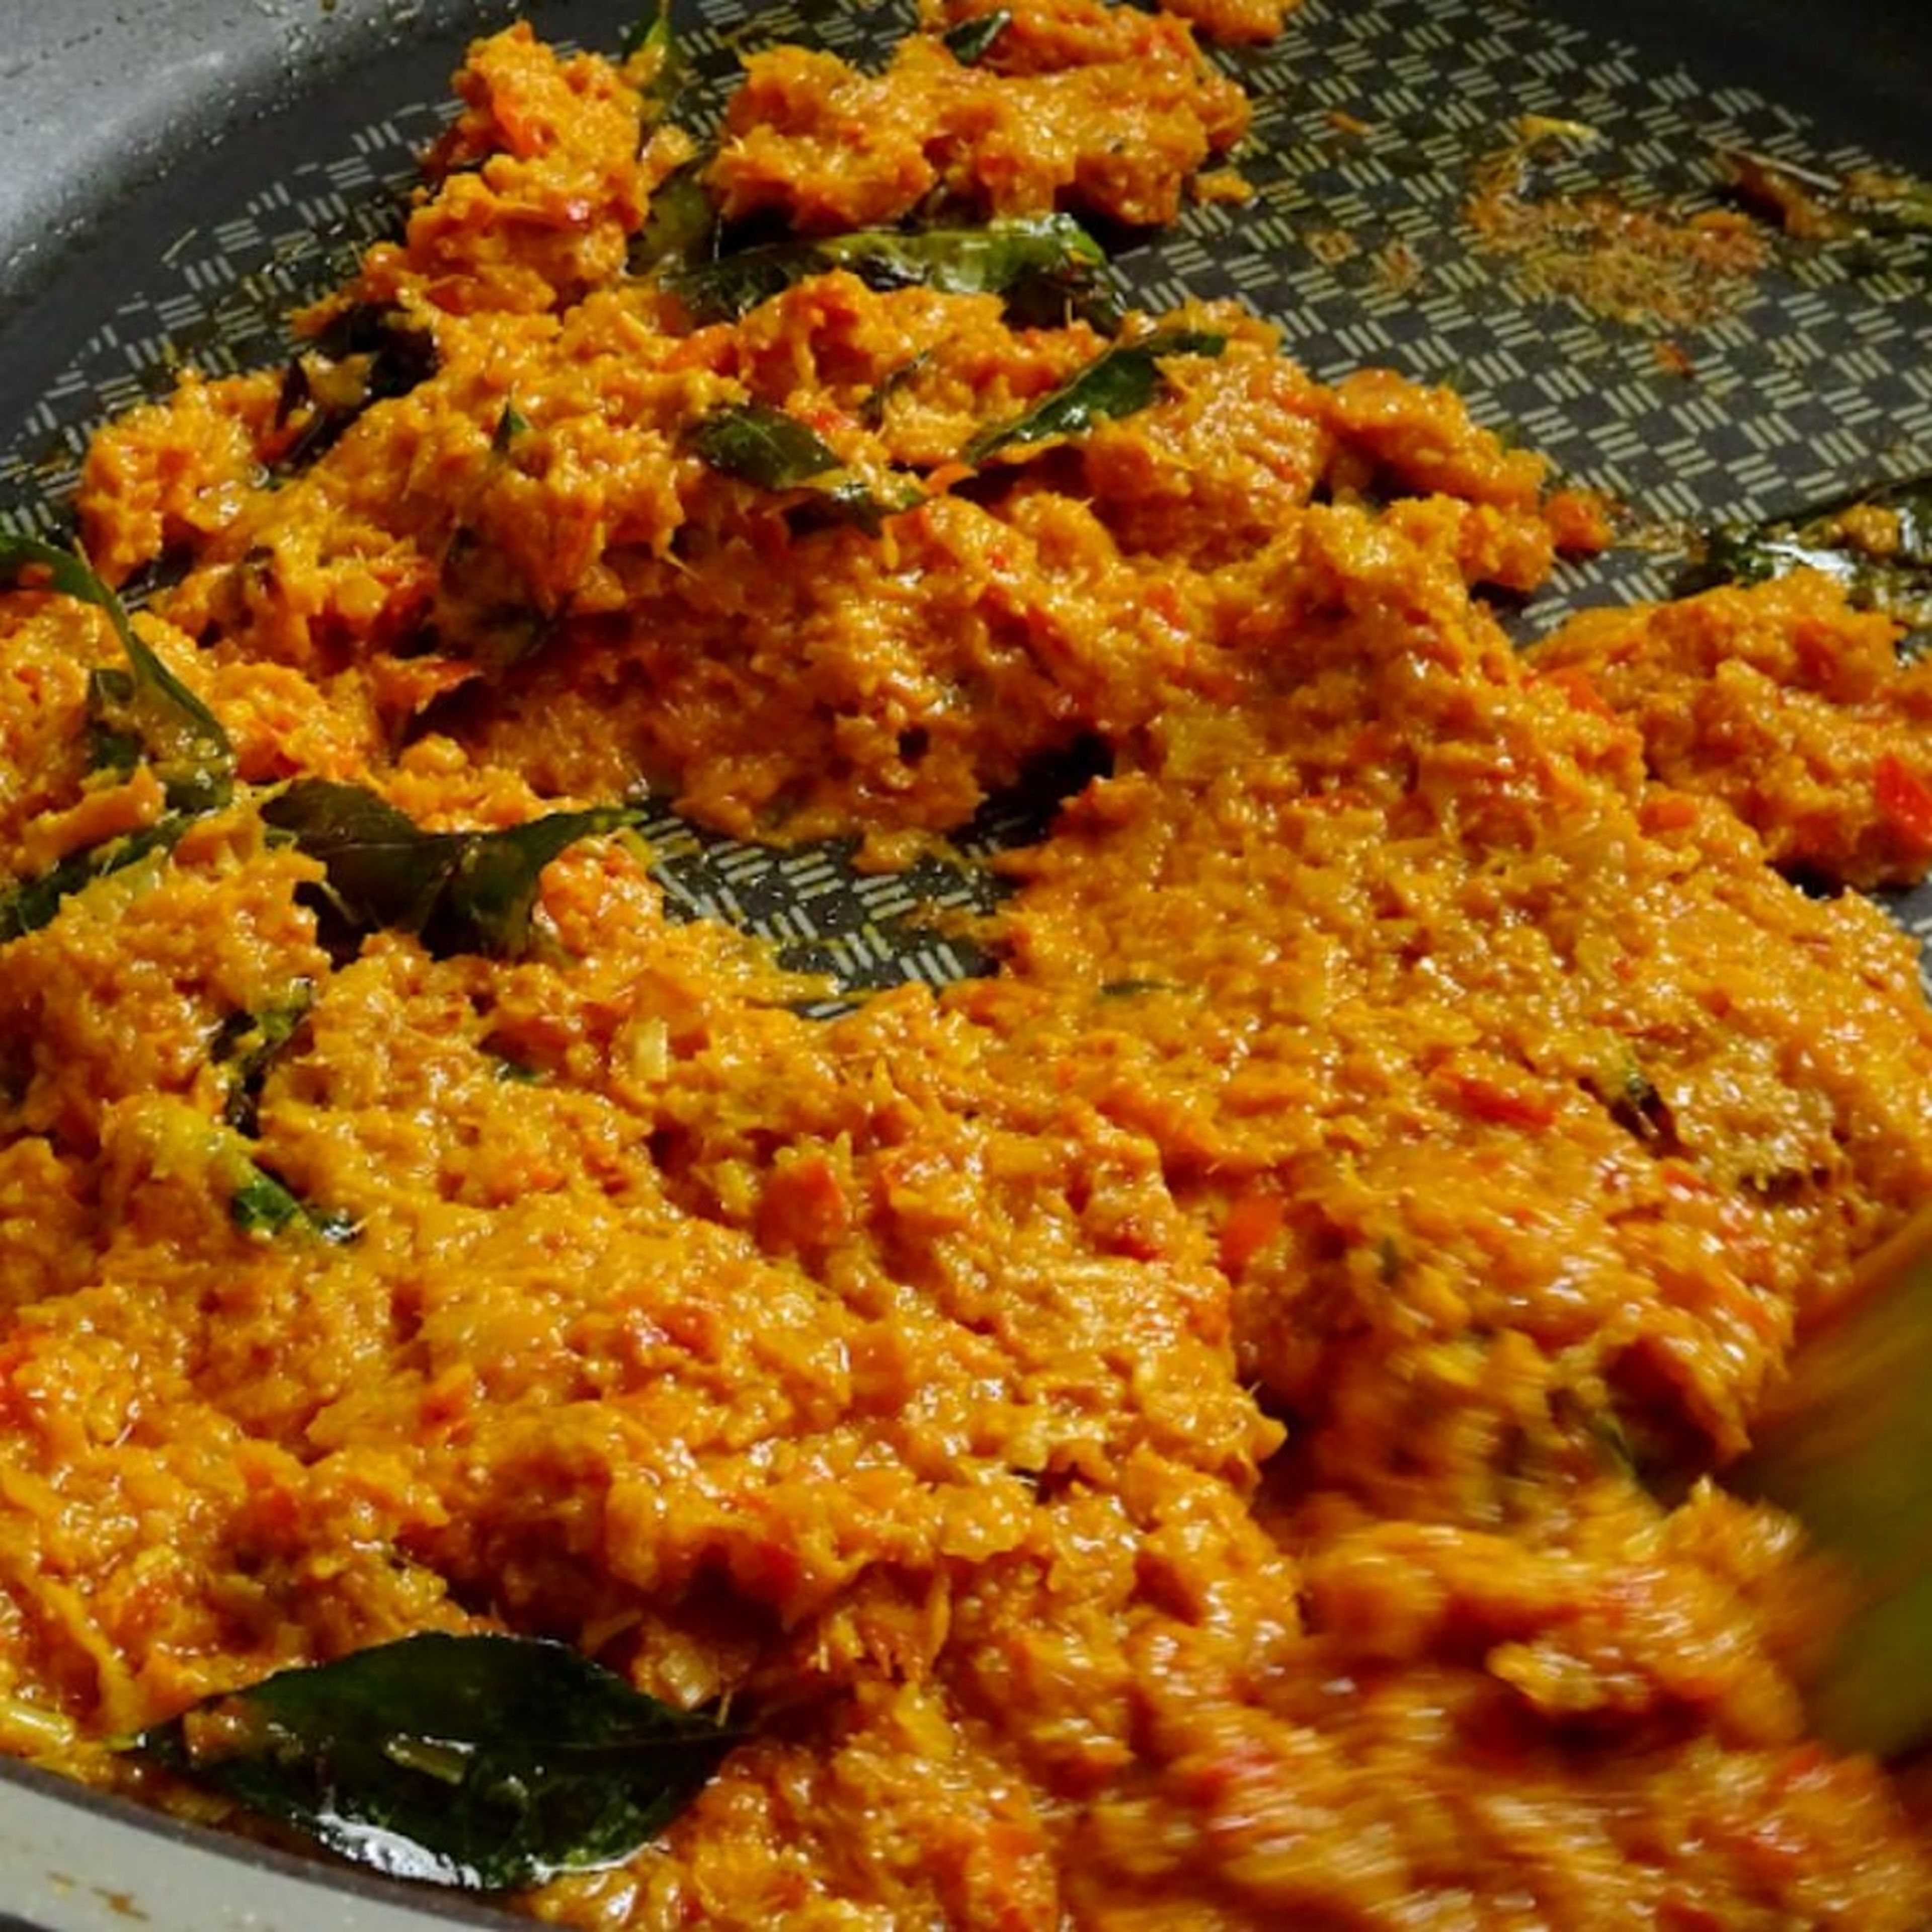 Fry the curry leaves in some oil, then add-in the curry paste until fragrant and oil starts to flip from the paste.